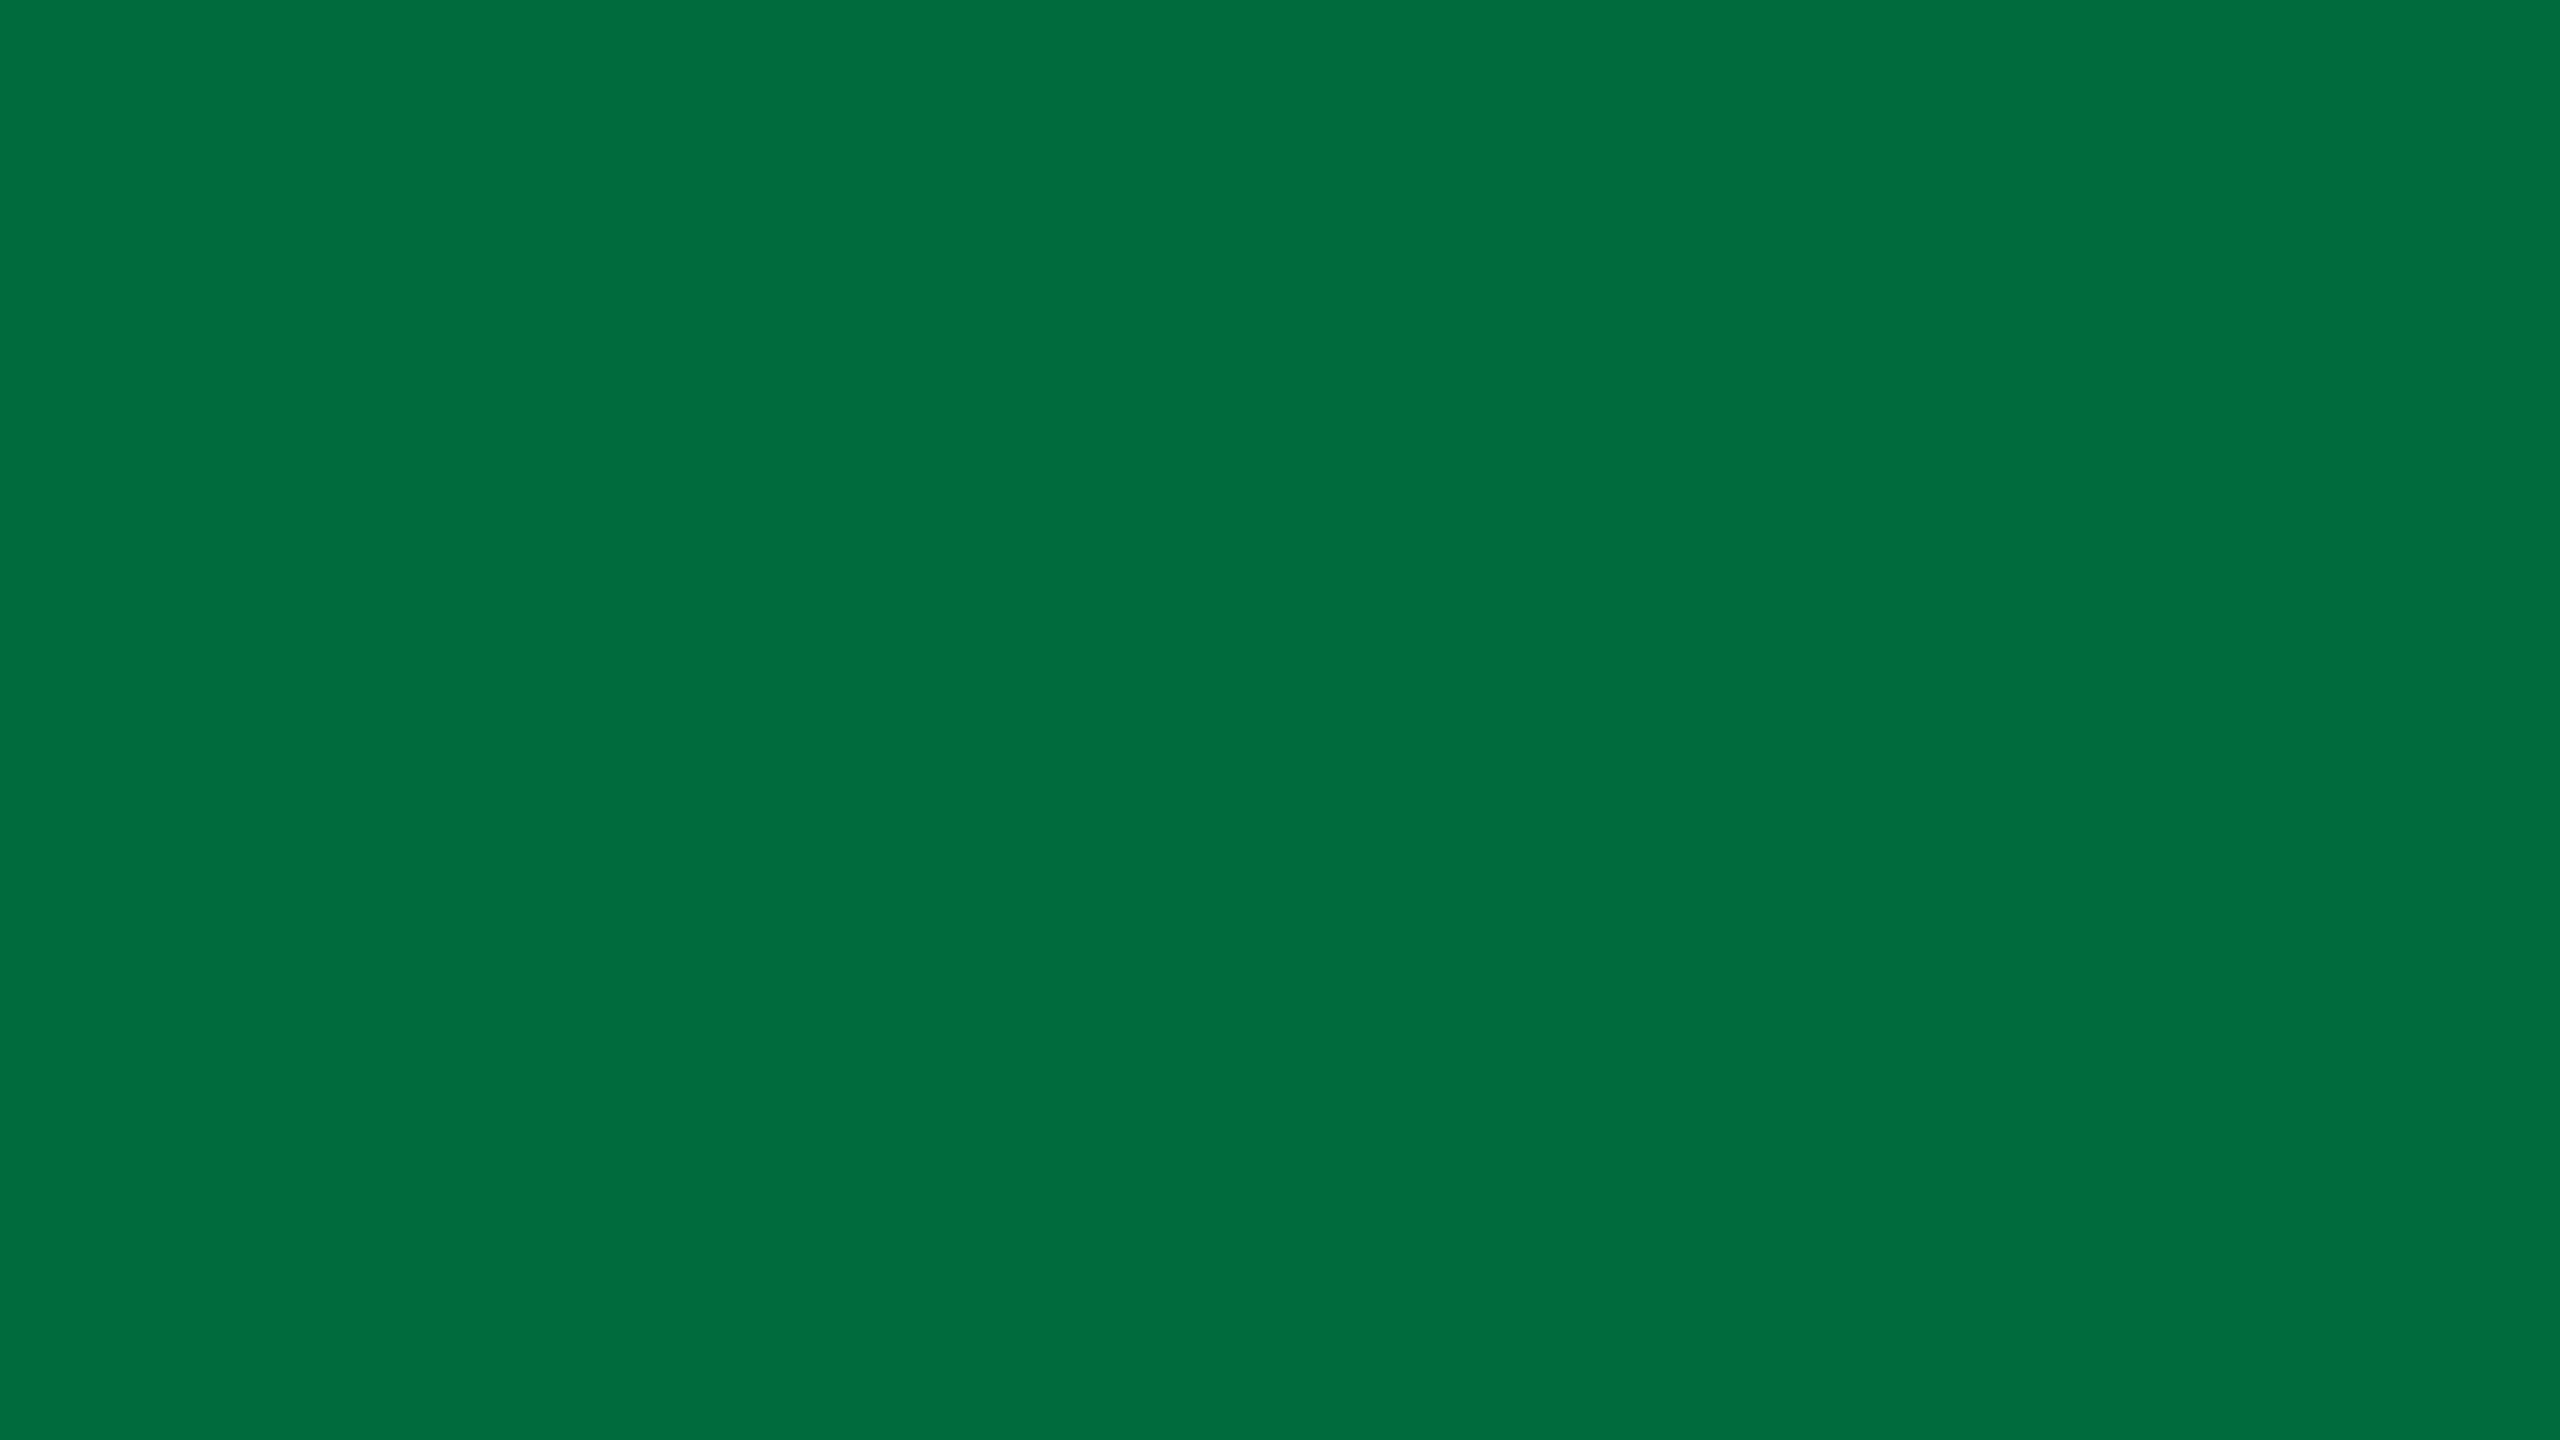 2560x1440 Cadmium Green Solid Color Background